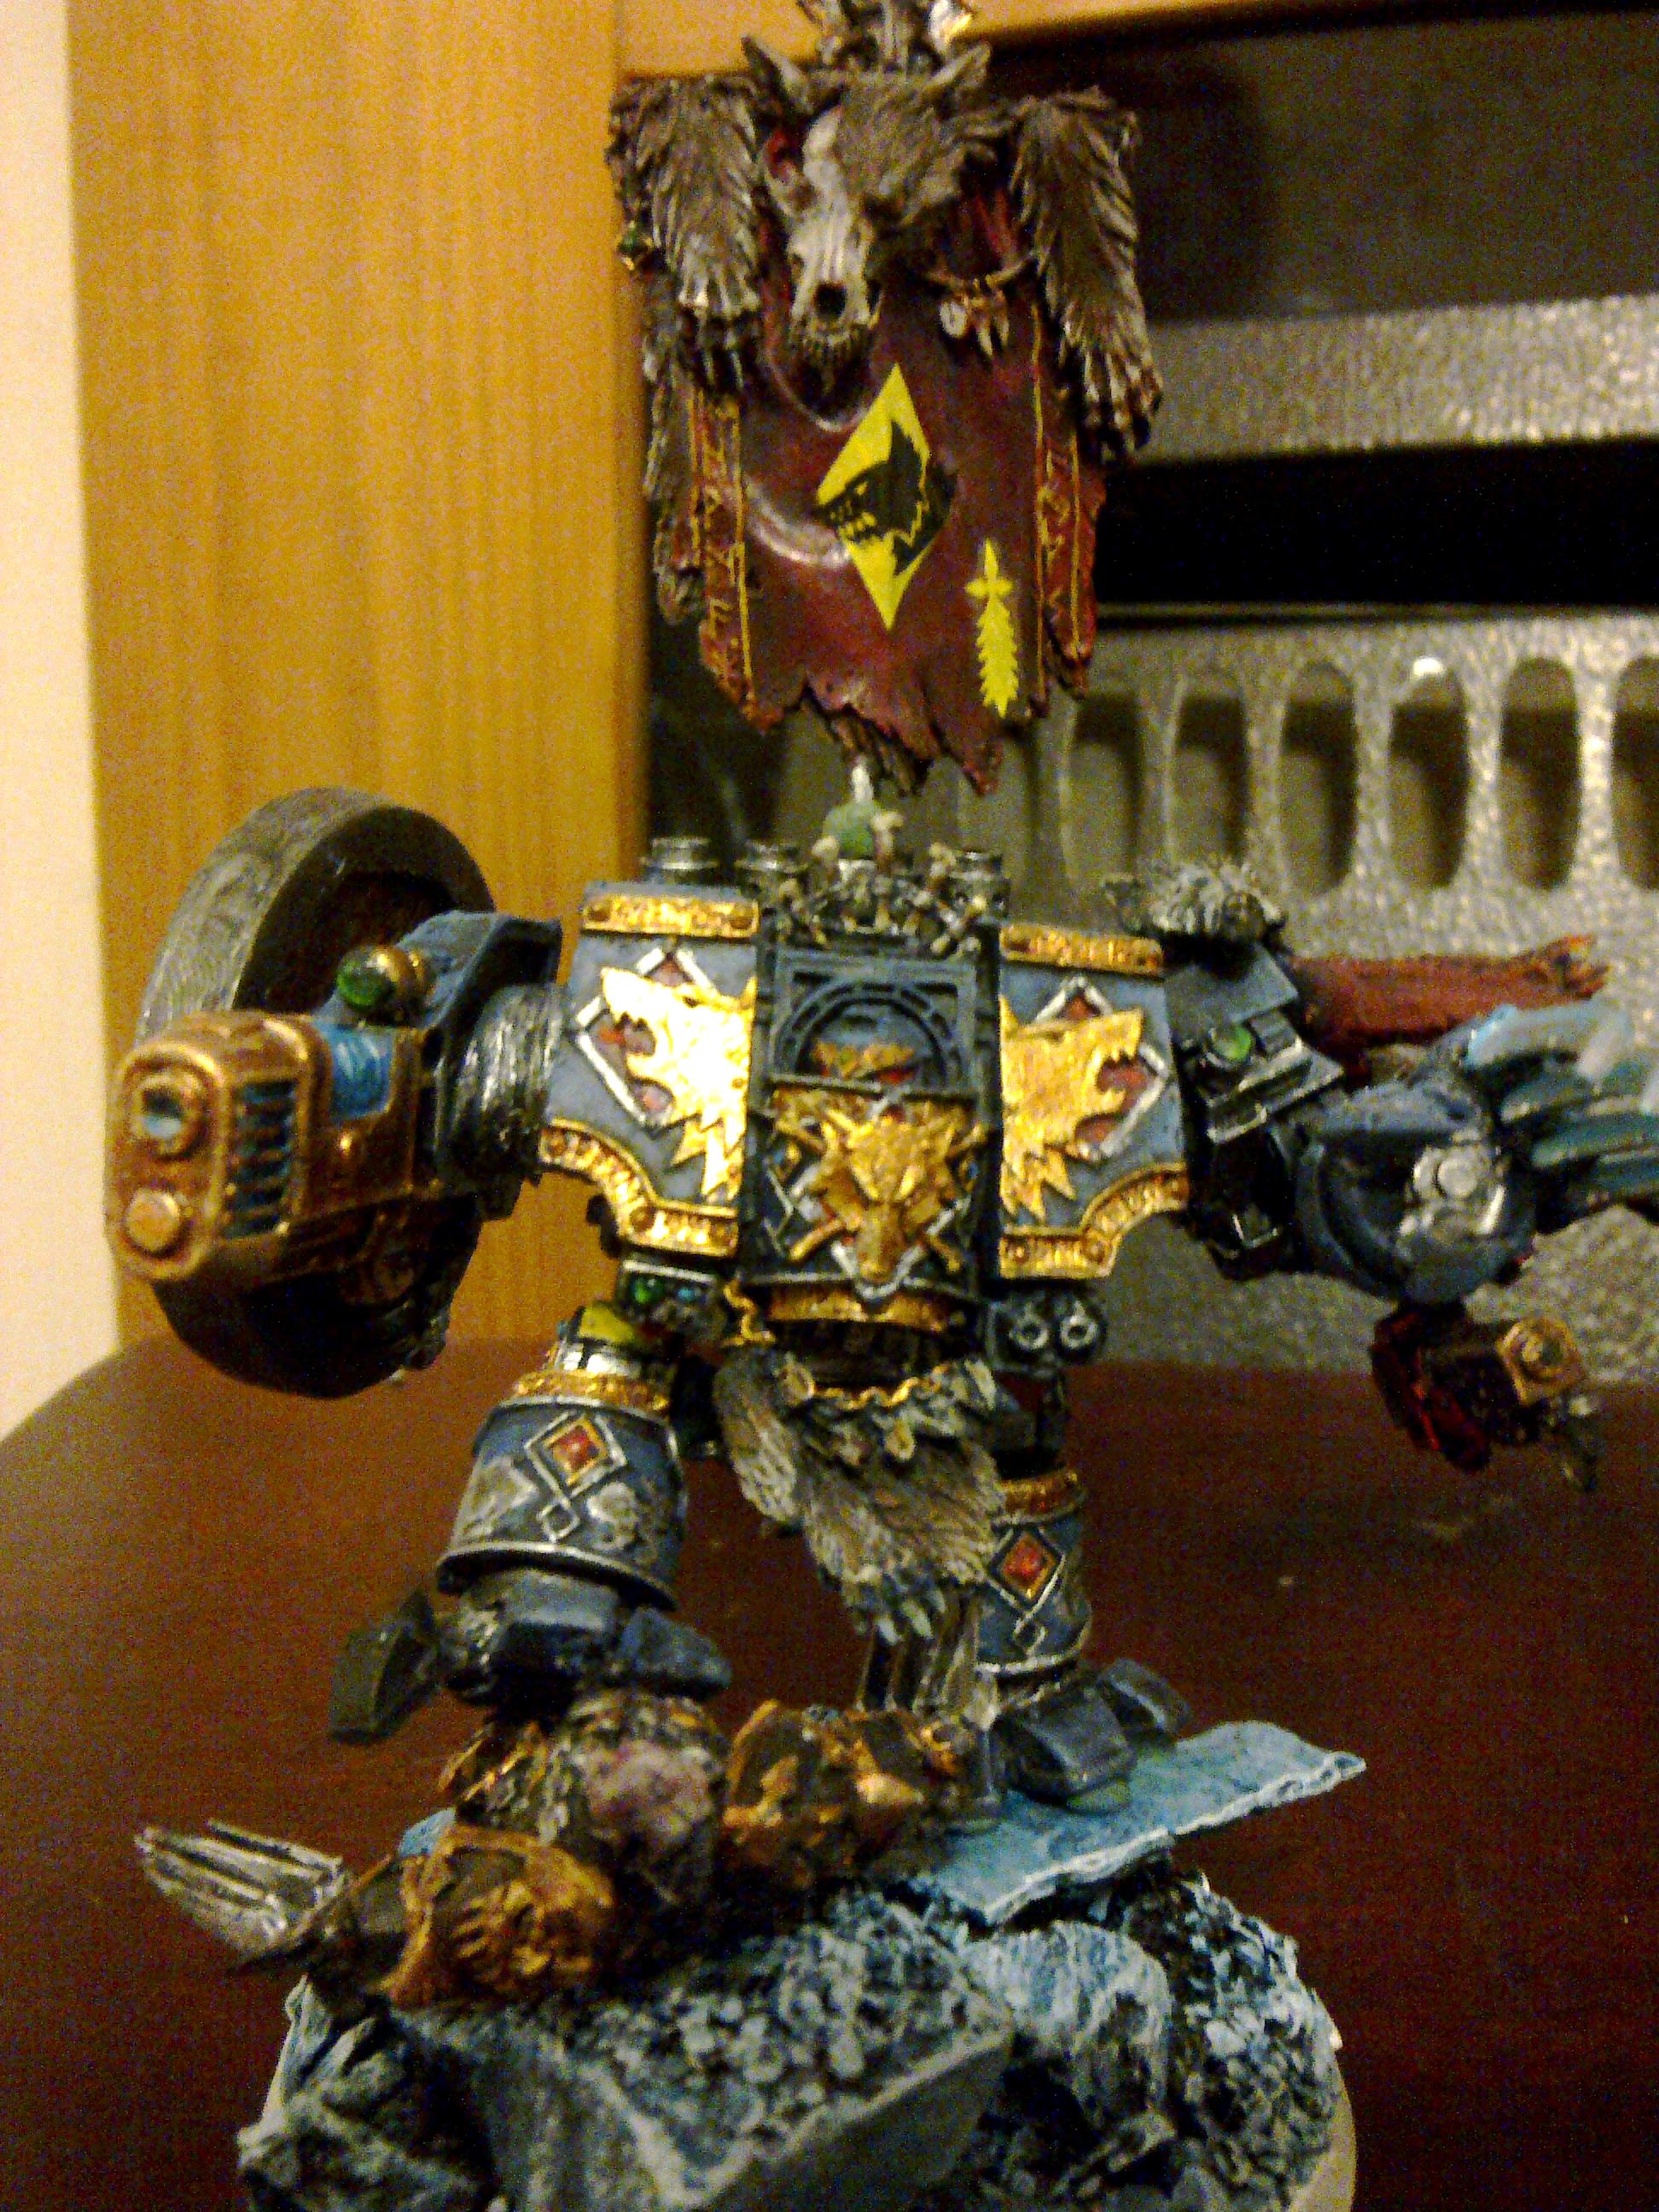 Space wolves dreadnought